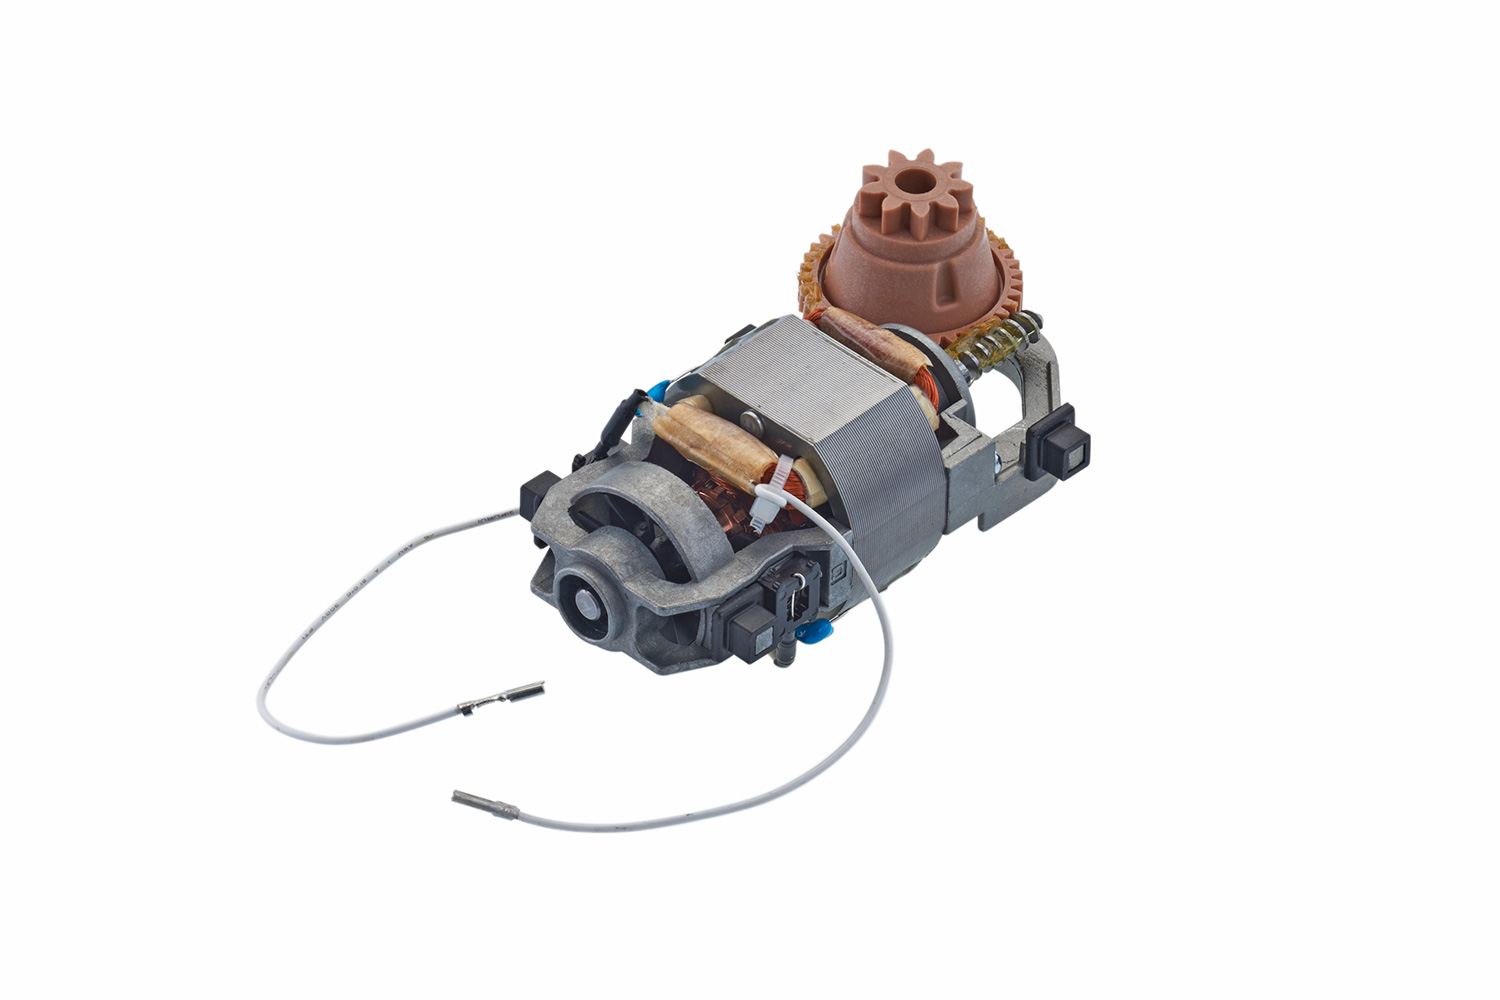 Motor with a brown gear (right-handed operated)